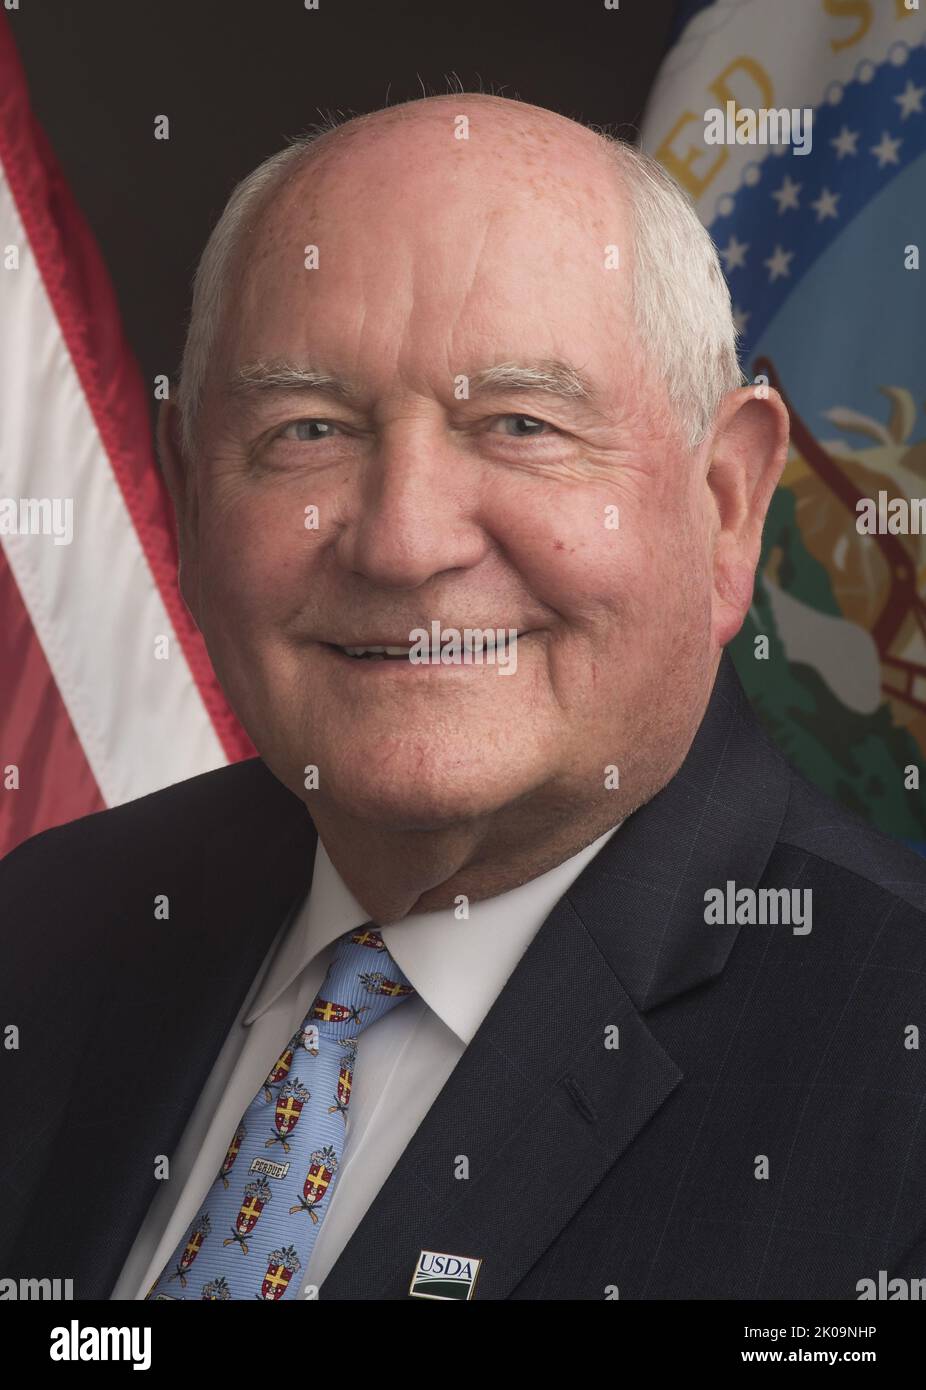 George Ervin 'Sonny' Perdue III (born December 20, 1946) is an American veterinarian, businessman, and politician who served as the 31st United States Secretary of Agriculture from 2017 to 2021. He previously served as the 81st Governor of Georgia from 2003 to 2011; Perdue was the first Republican to hold the office since the Reconstruction era. Stock Photo